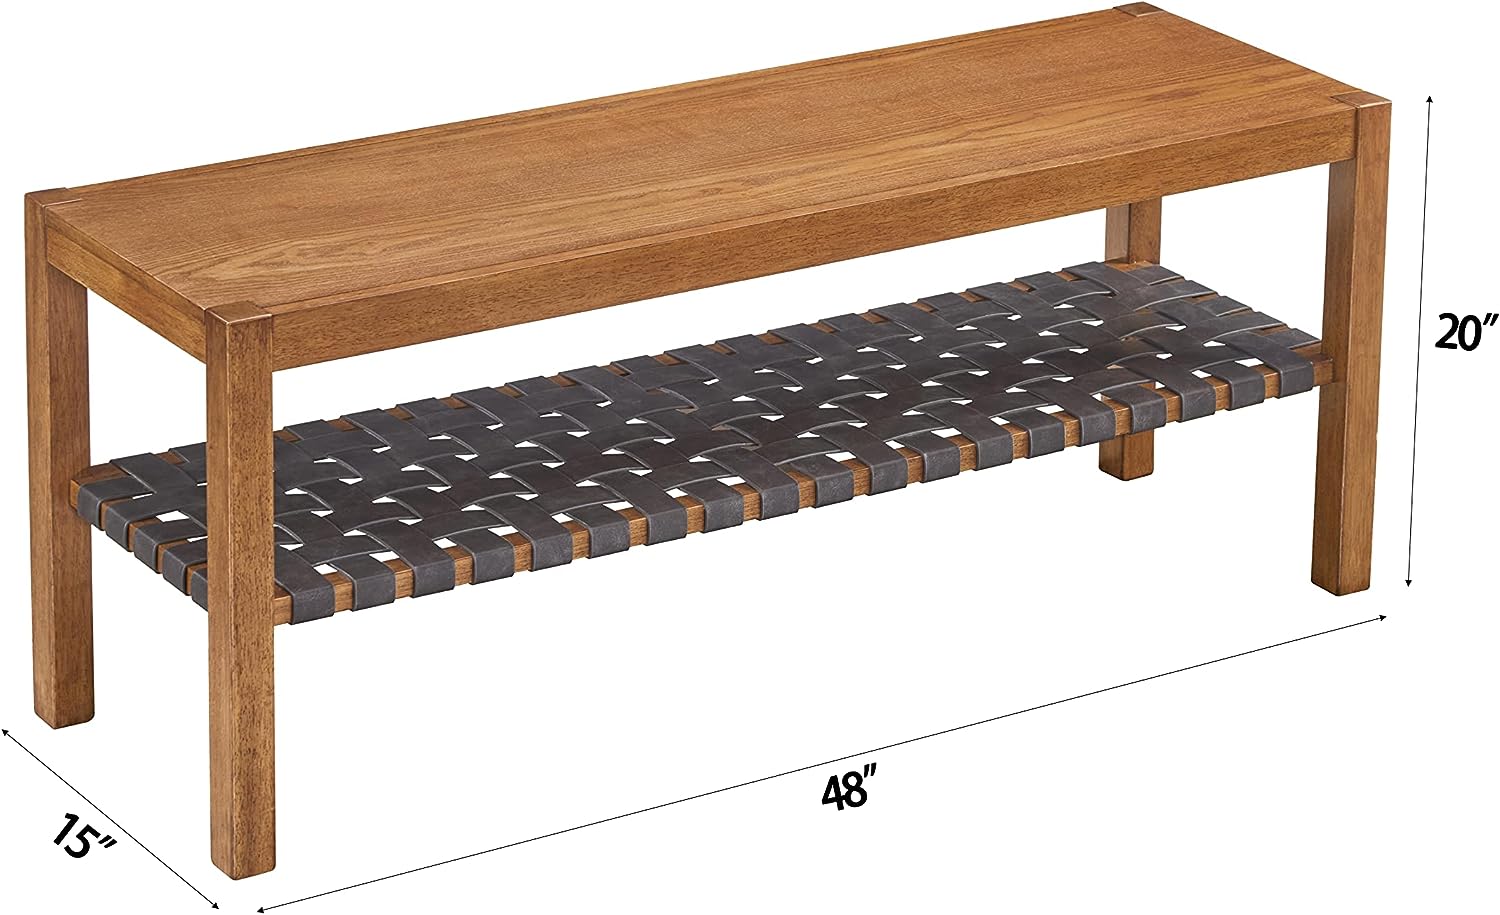 Ball & Cast Entryway Storage Bench Wood Frame Shoe Bench - $90